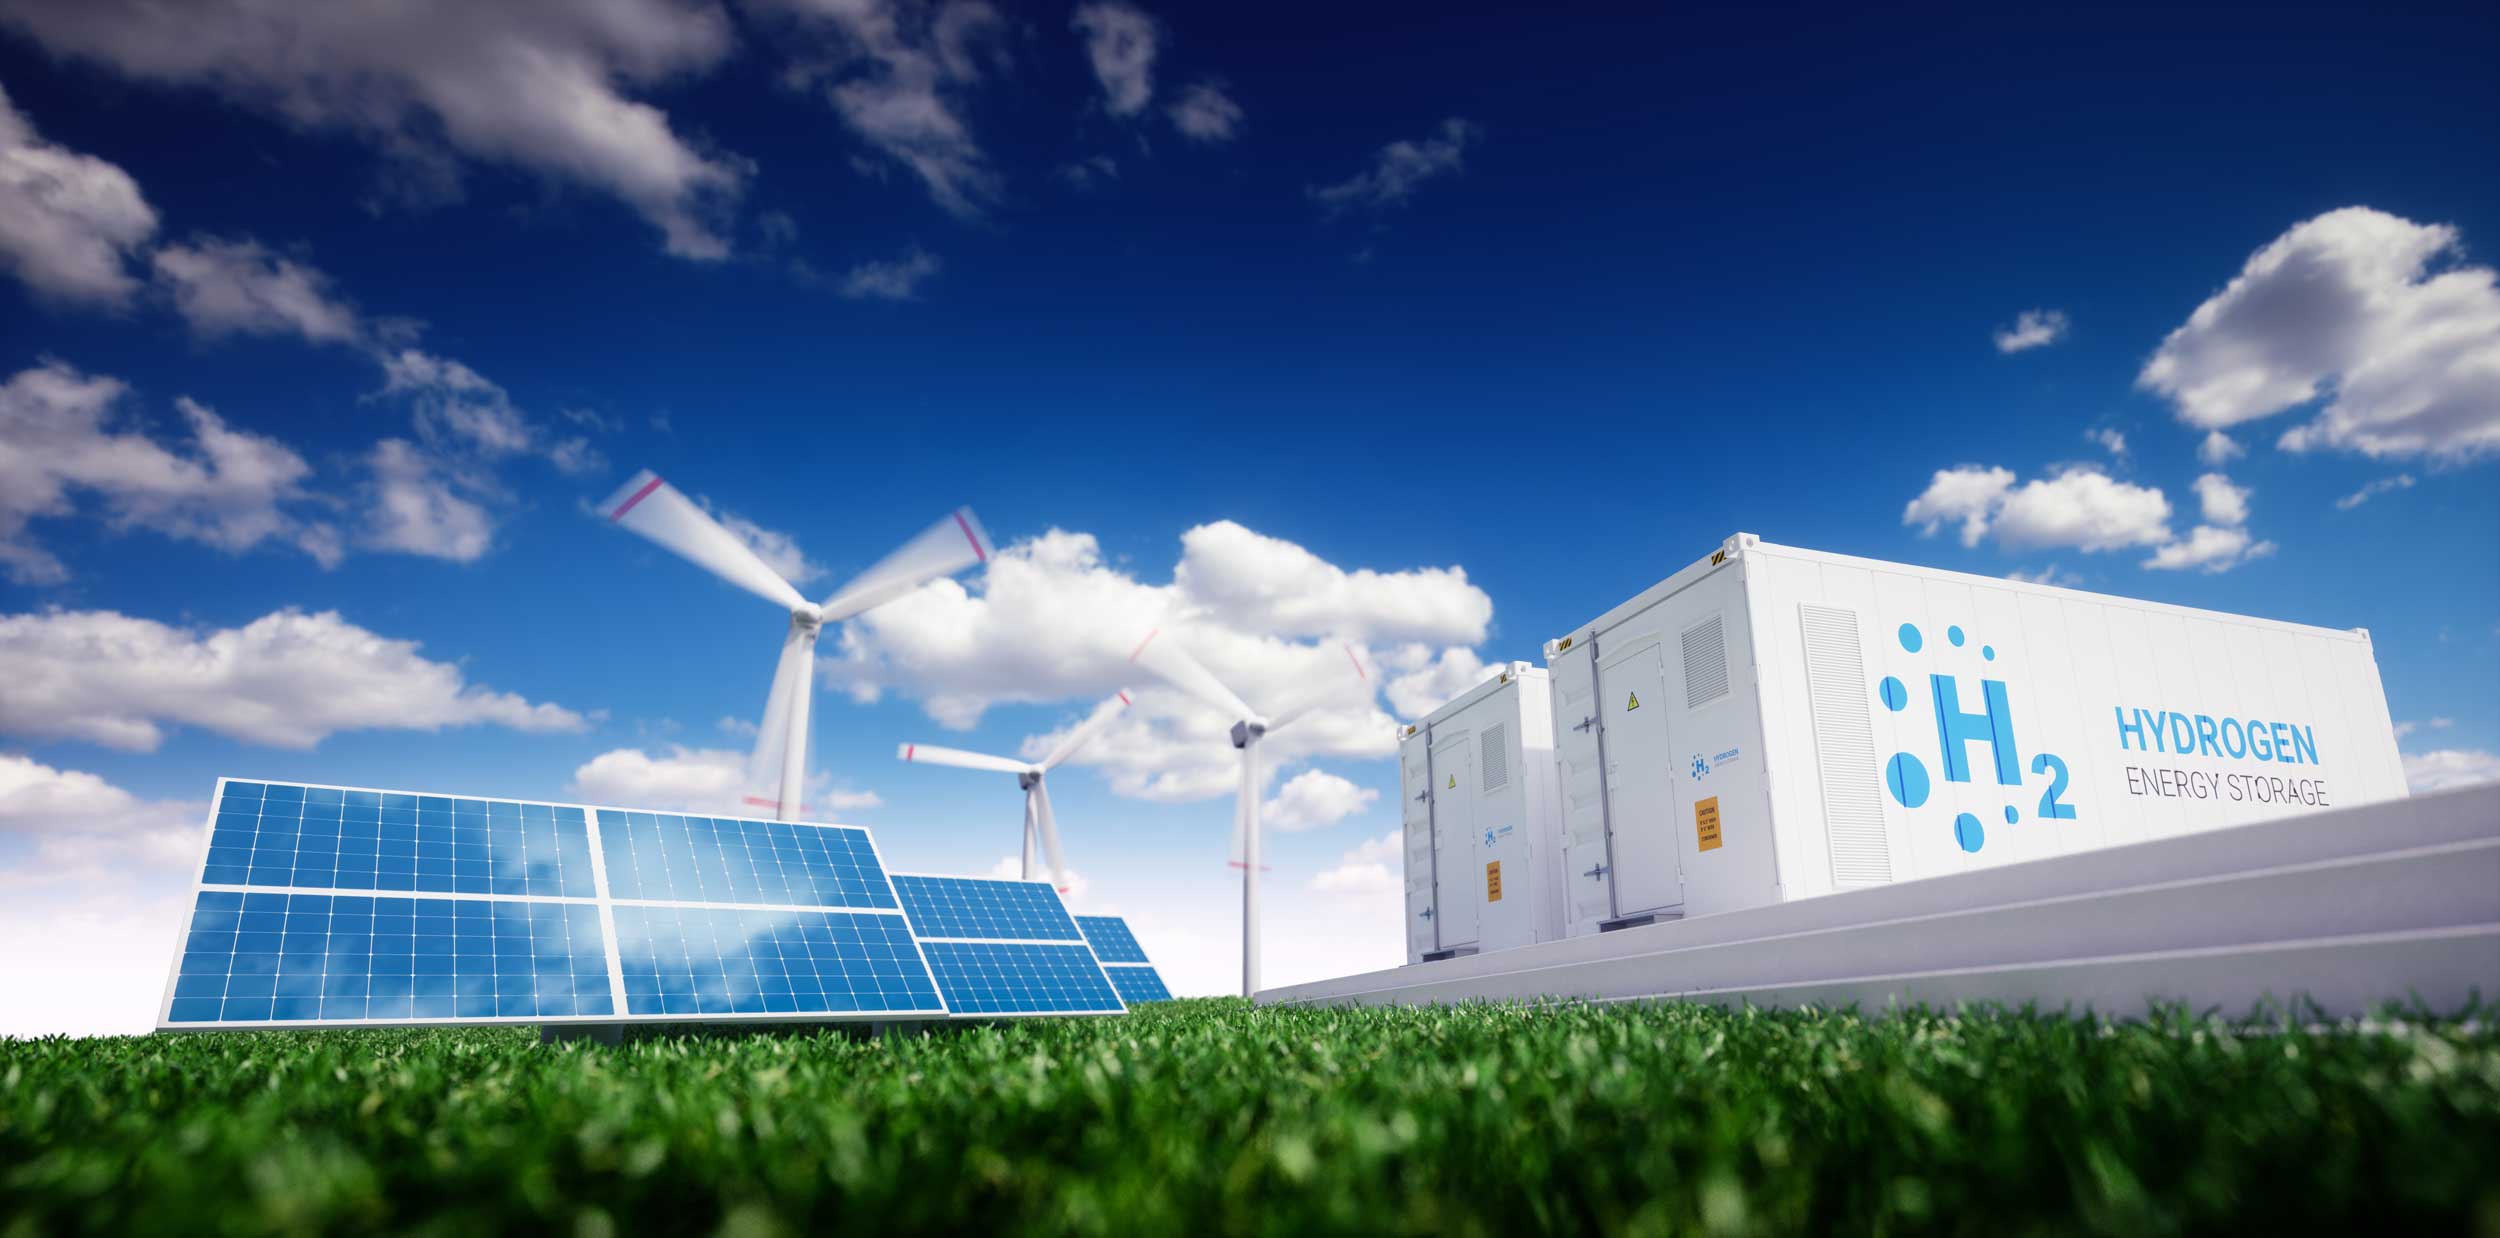 Being smart about energy storage